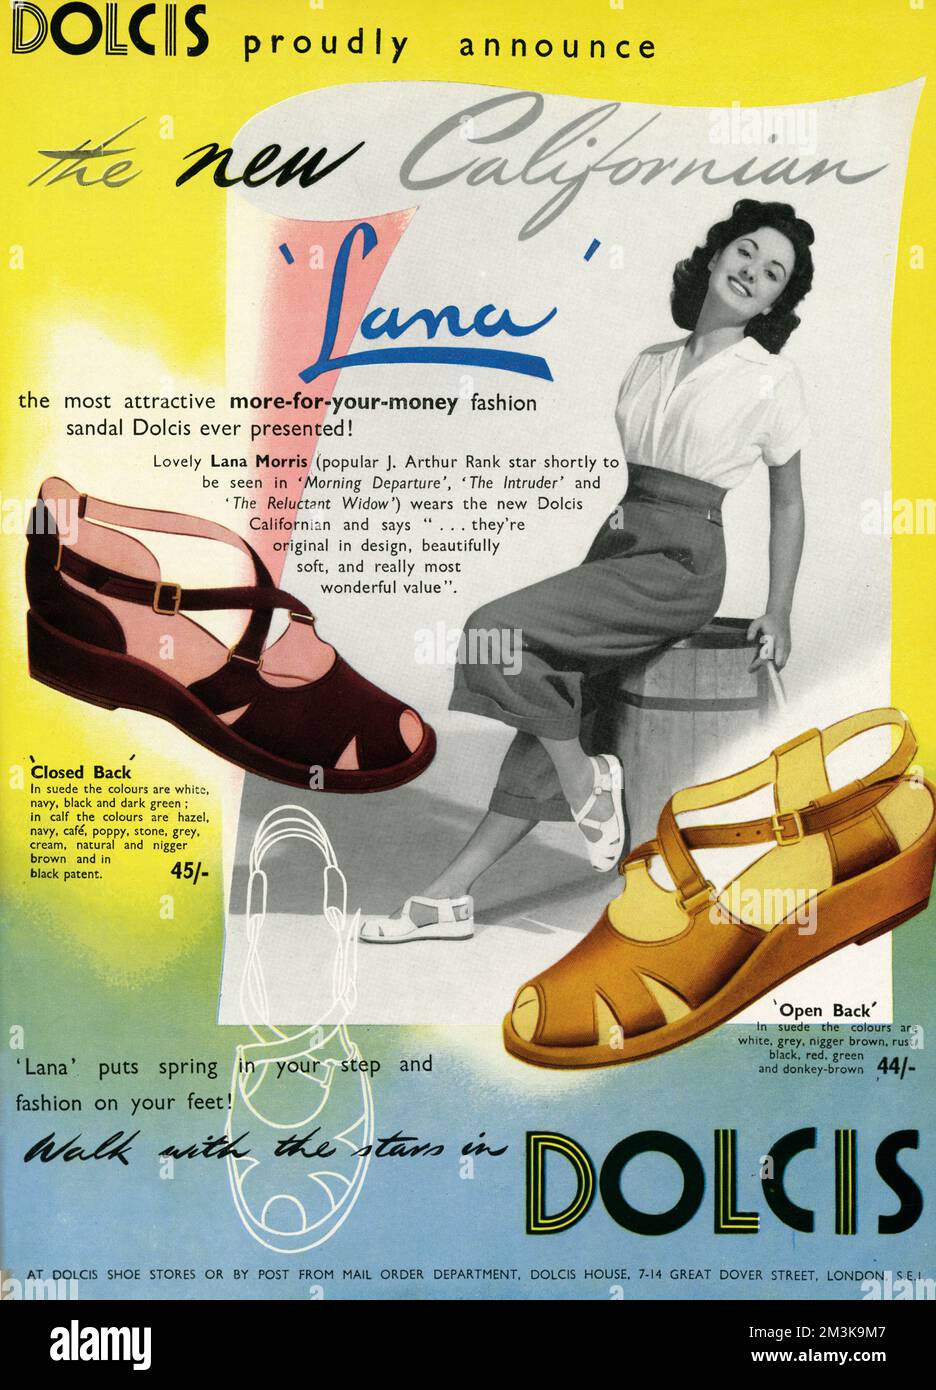 Dolcis proudly announce the new 'Californian 'Lana'.     Date: 1950 Stock Photo